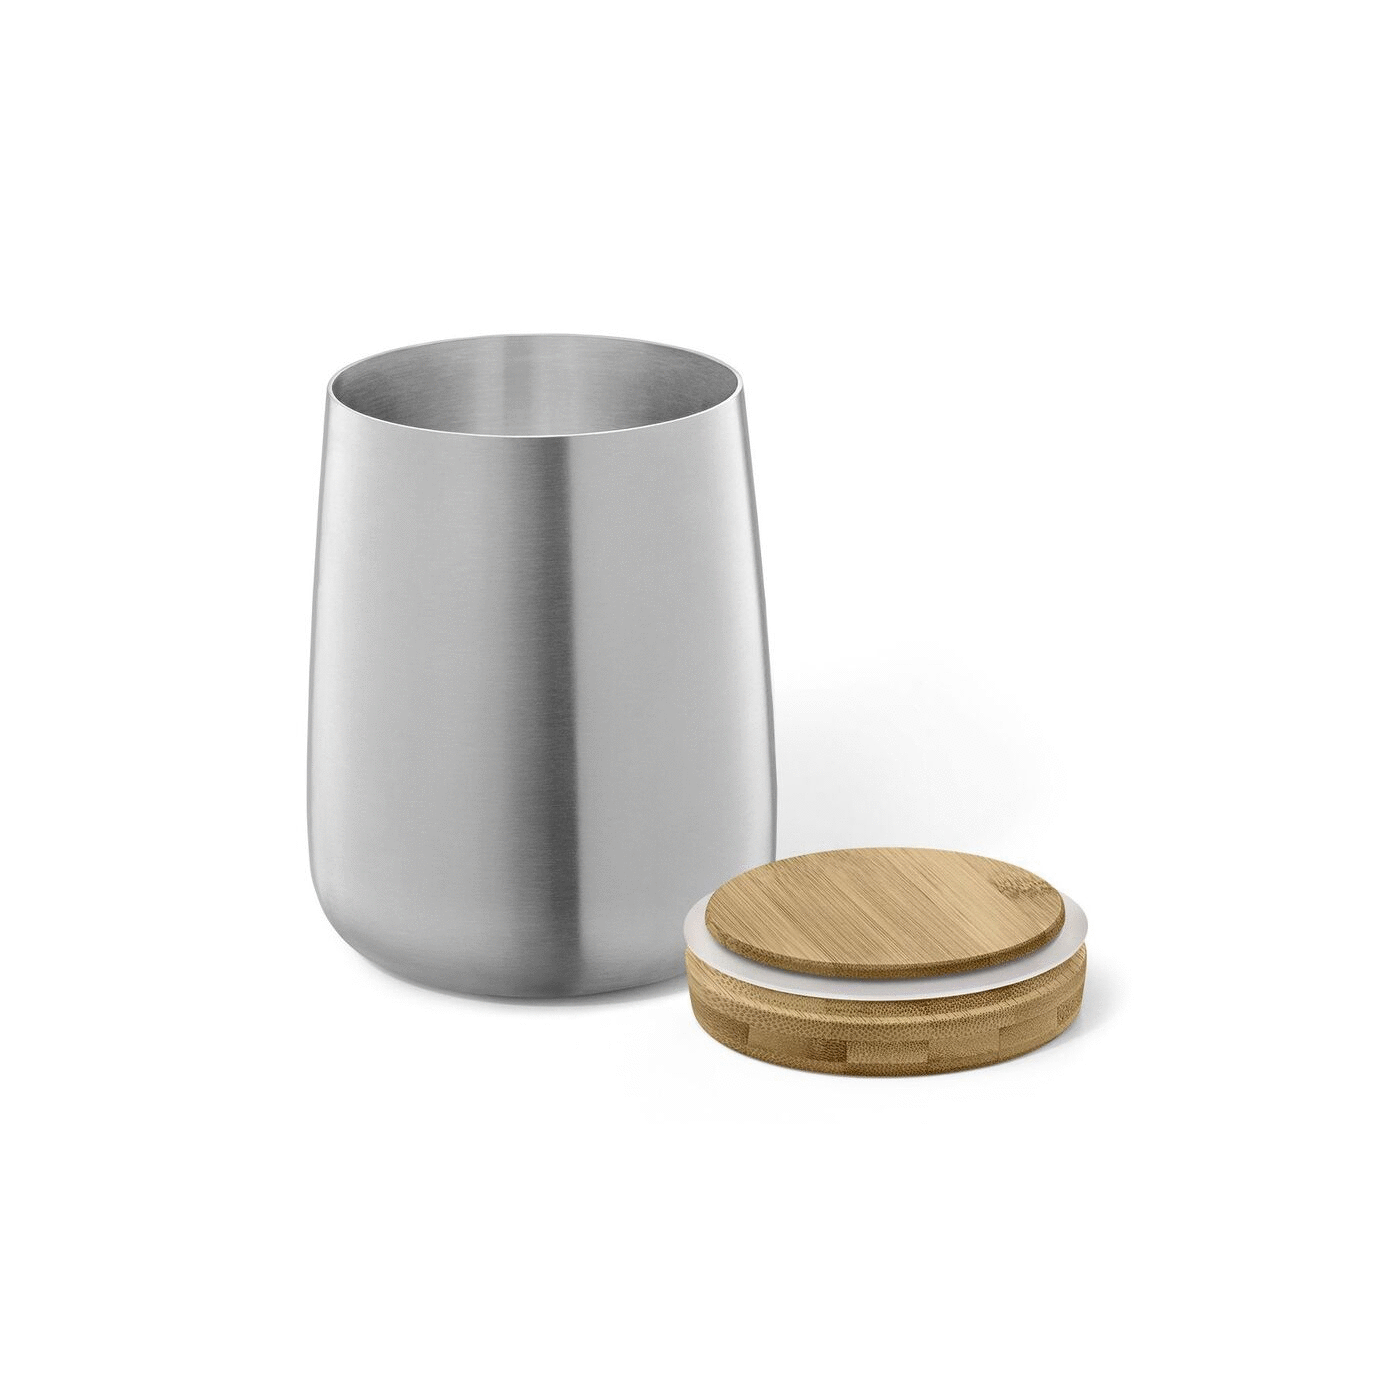 Zack Bevo Brushed Stainless Steel 1.0ltr Storage Canister 20868